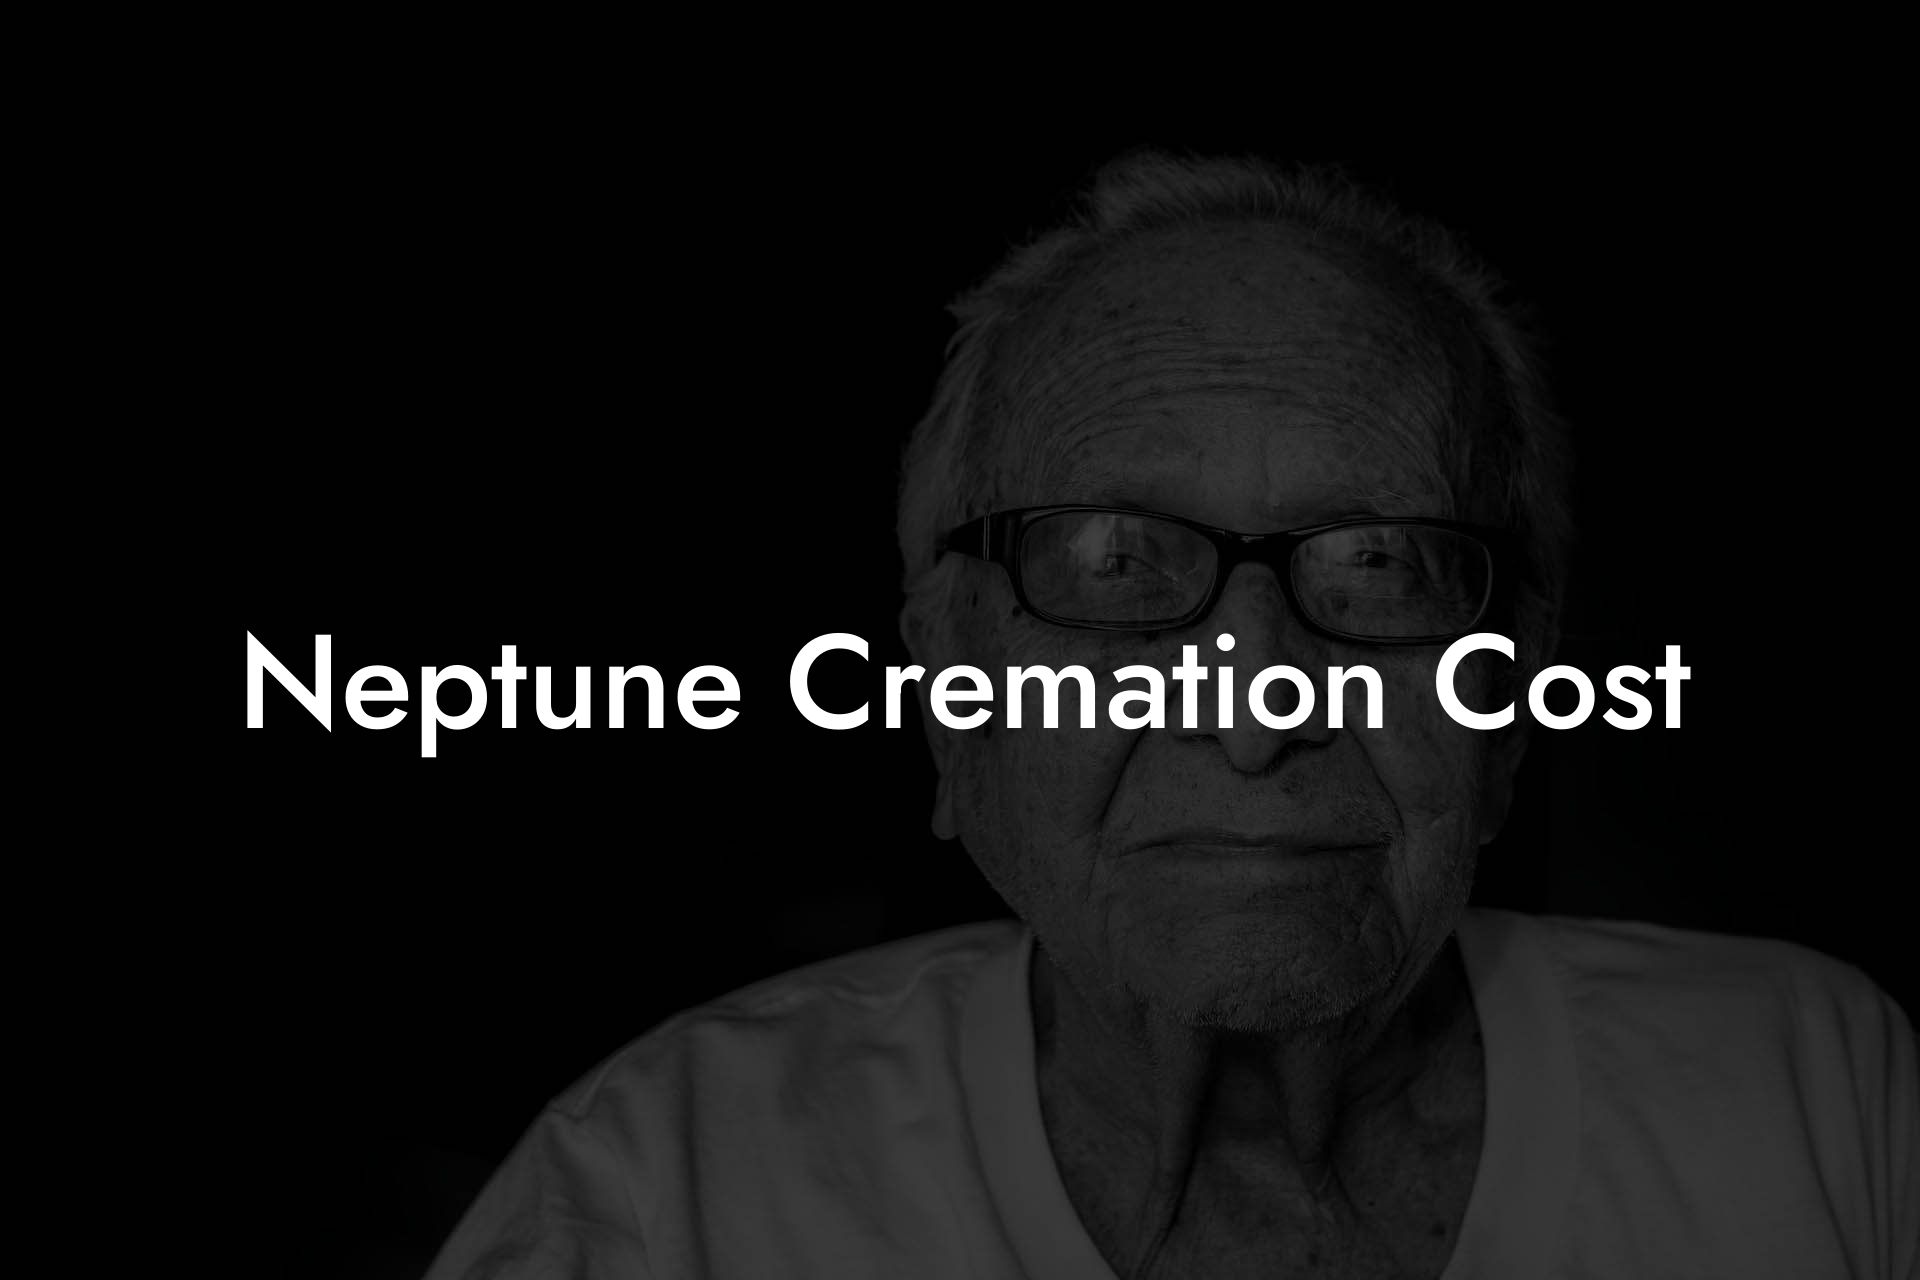 Neptune Cremation Cost